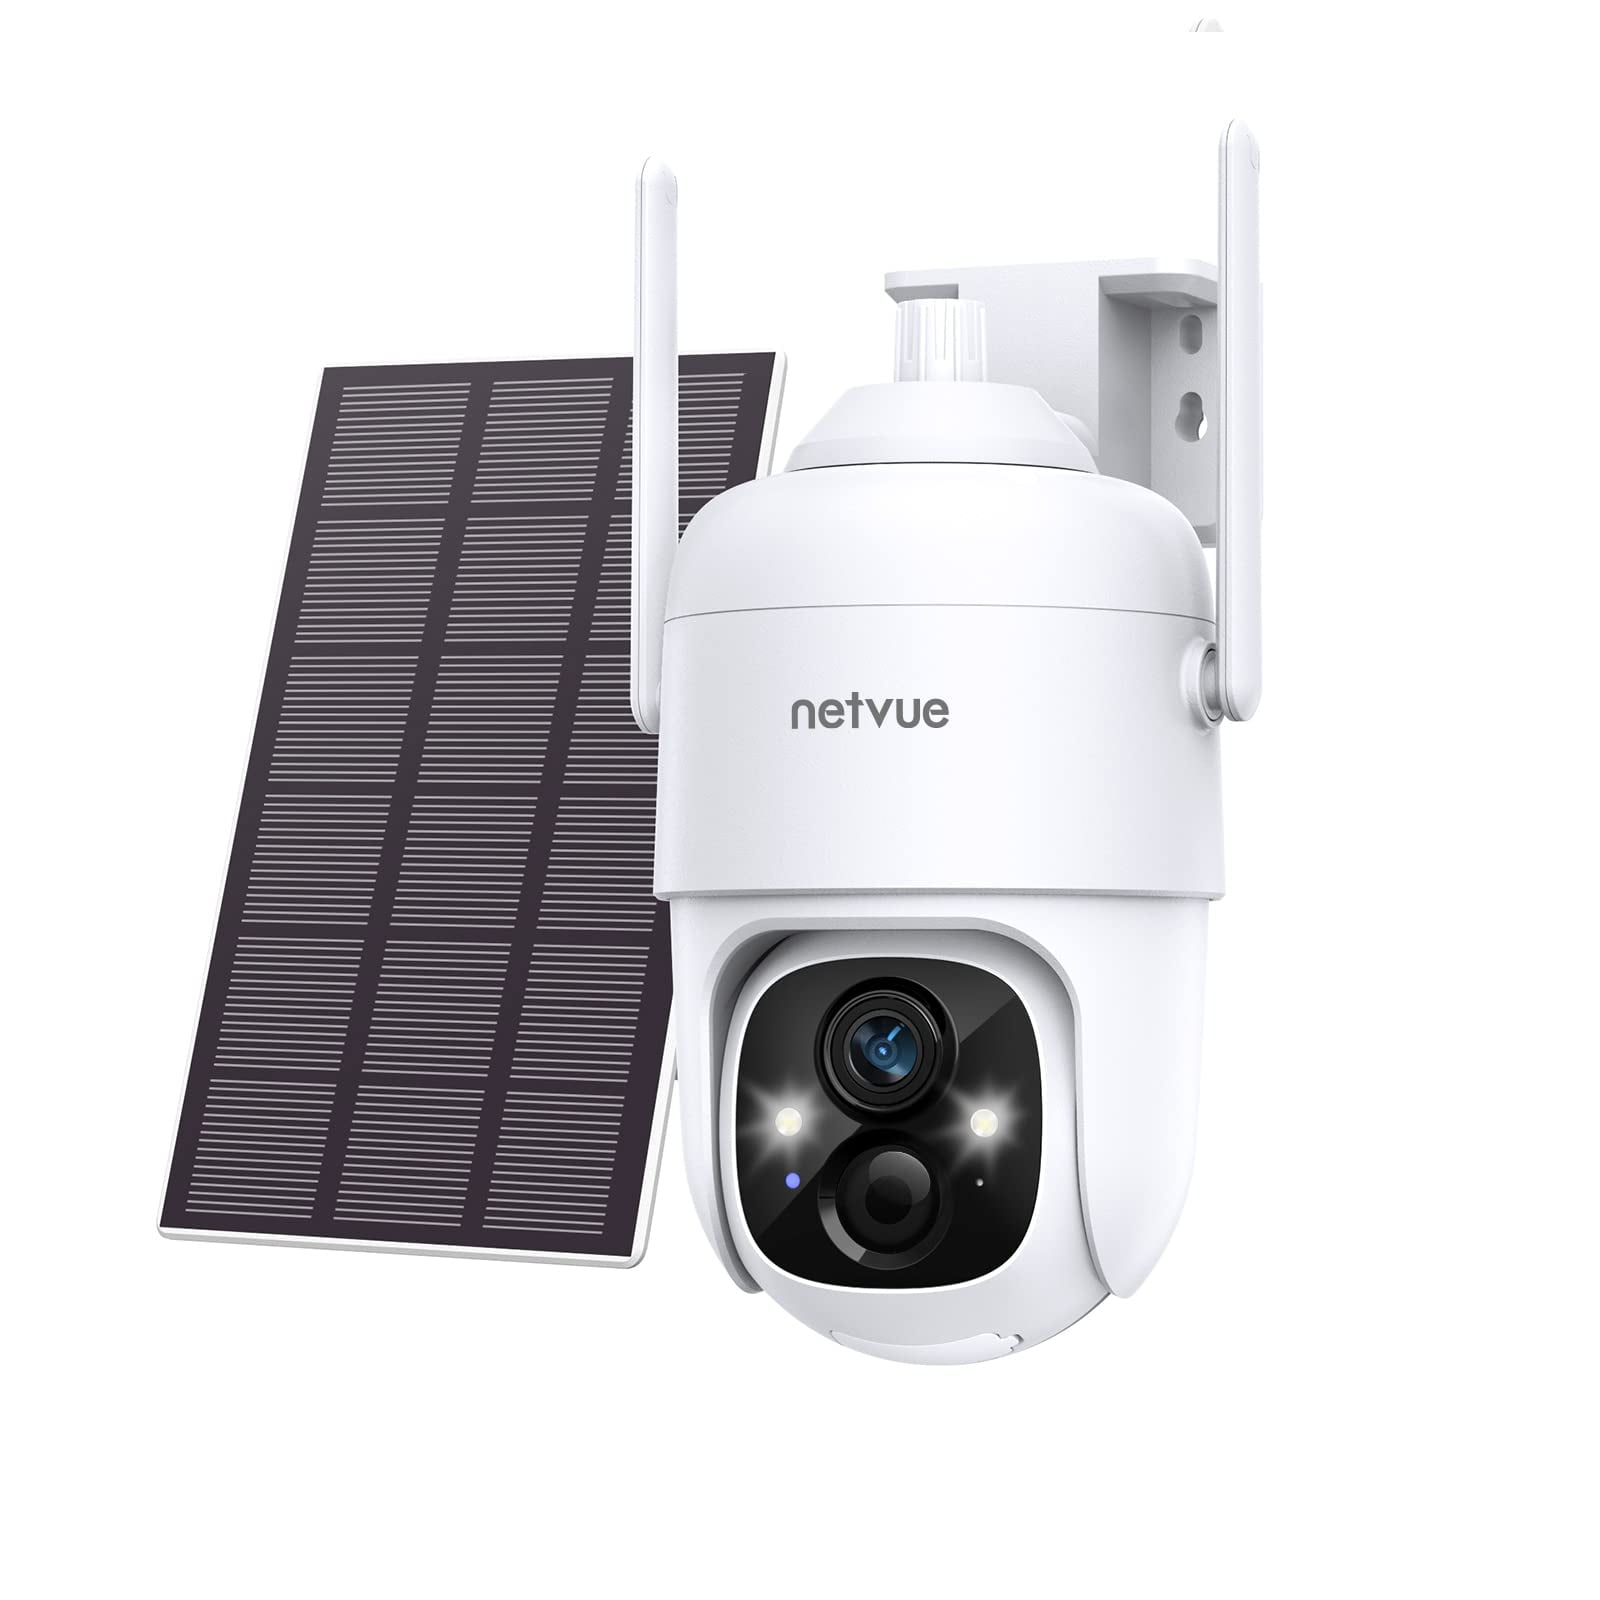 Seminarie rietje consumptie Solar Security Cameras, Wireless Outdoor WiFi Pan Tilt 360° Camera, Netvue  Rechargeable Battery Powered for Home Security, PIR Motion/Human AI  Detection, 2-Way Talk, Waterproof, SD/Cloud - Walmart.com